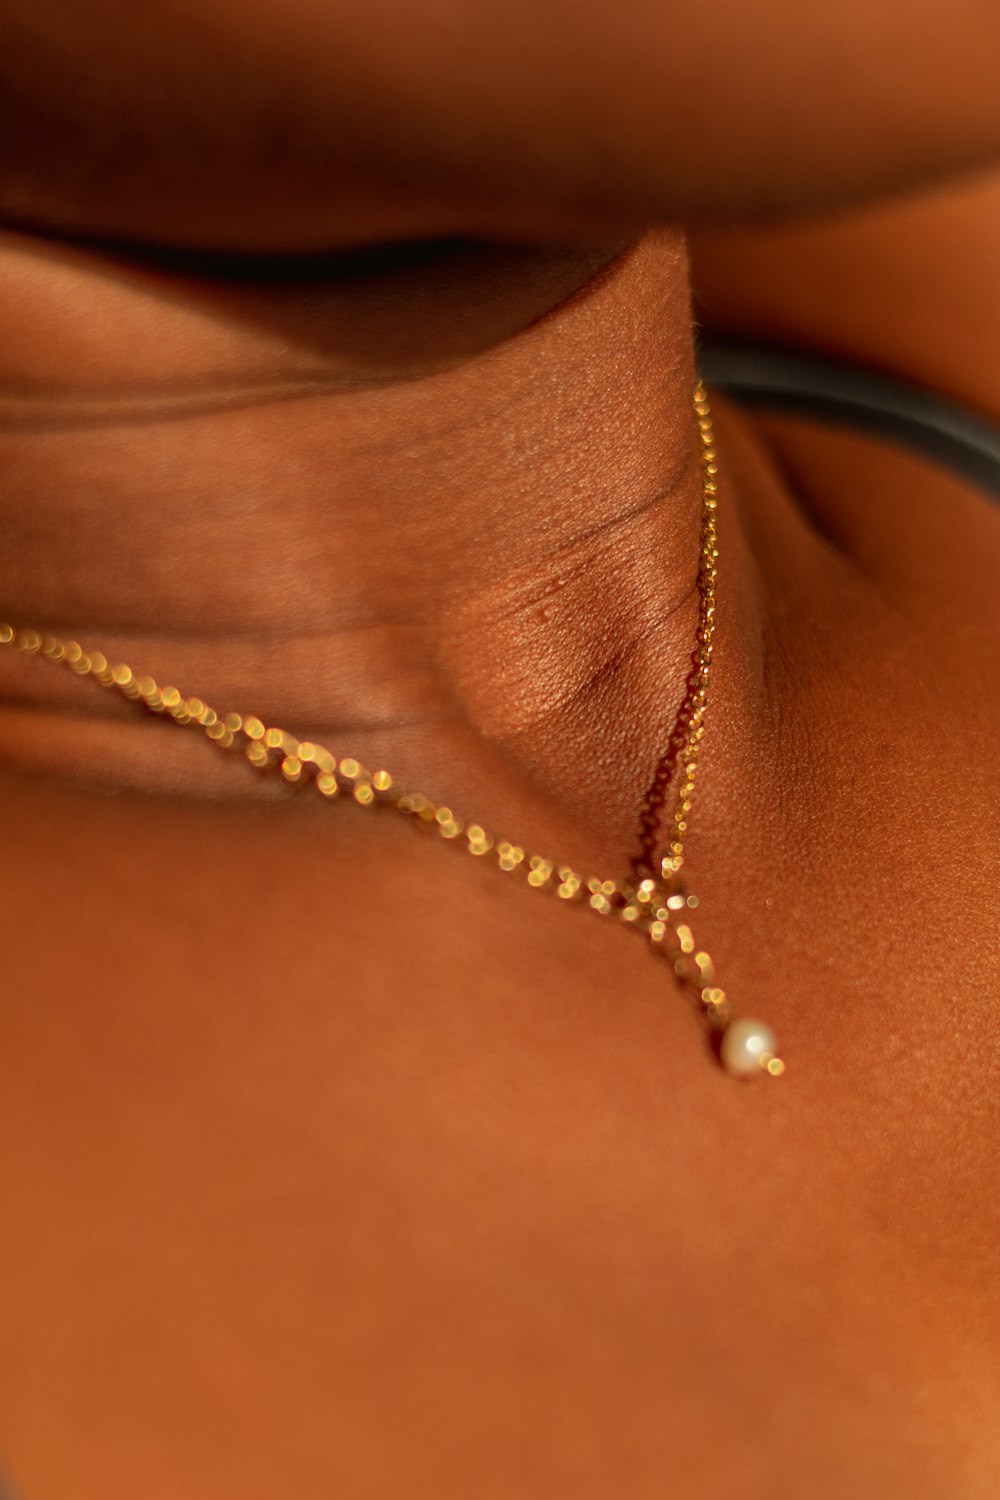 a close up of a person wearing a gold necklace